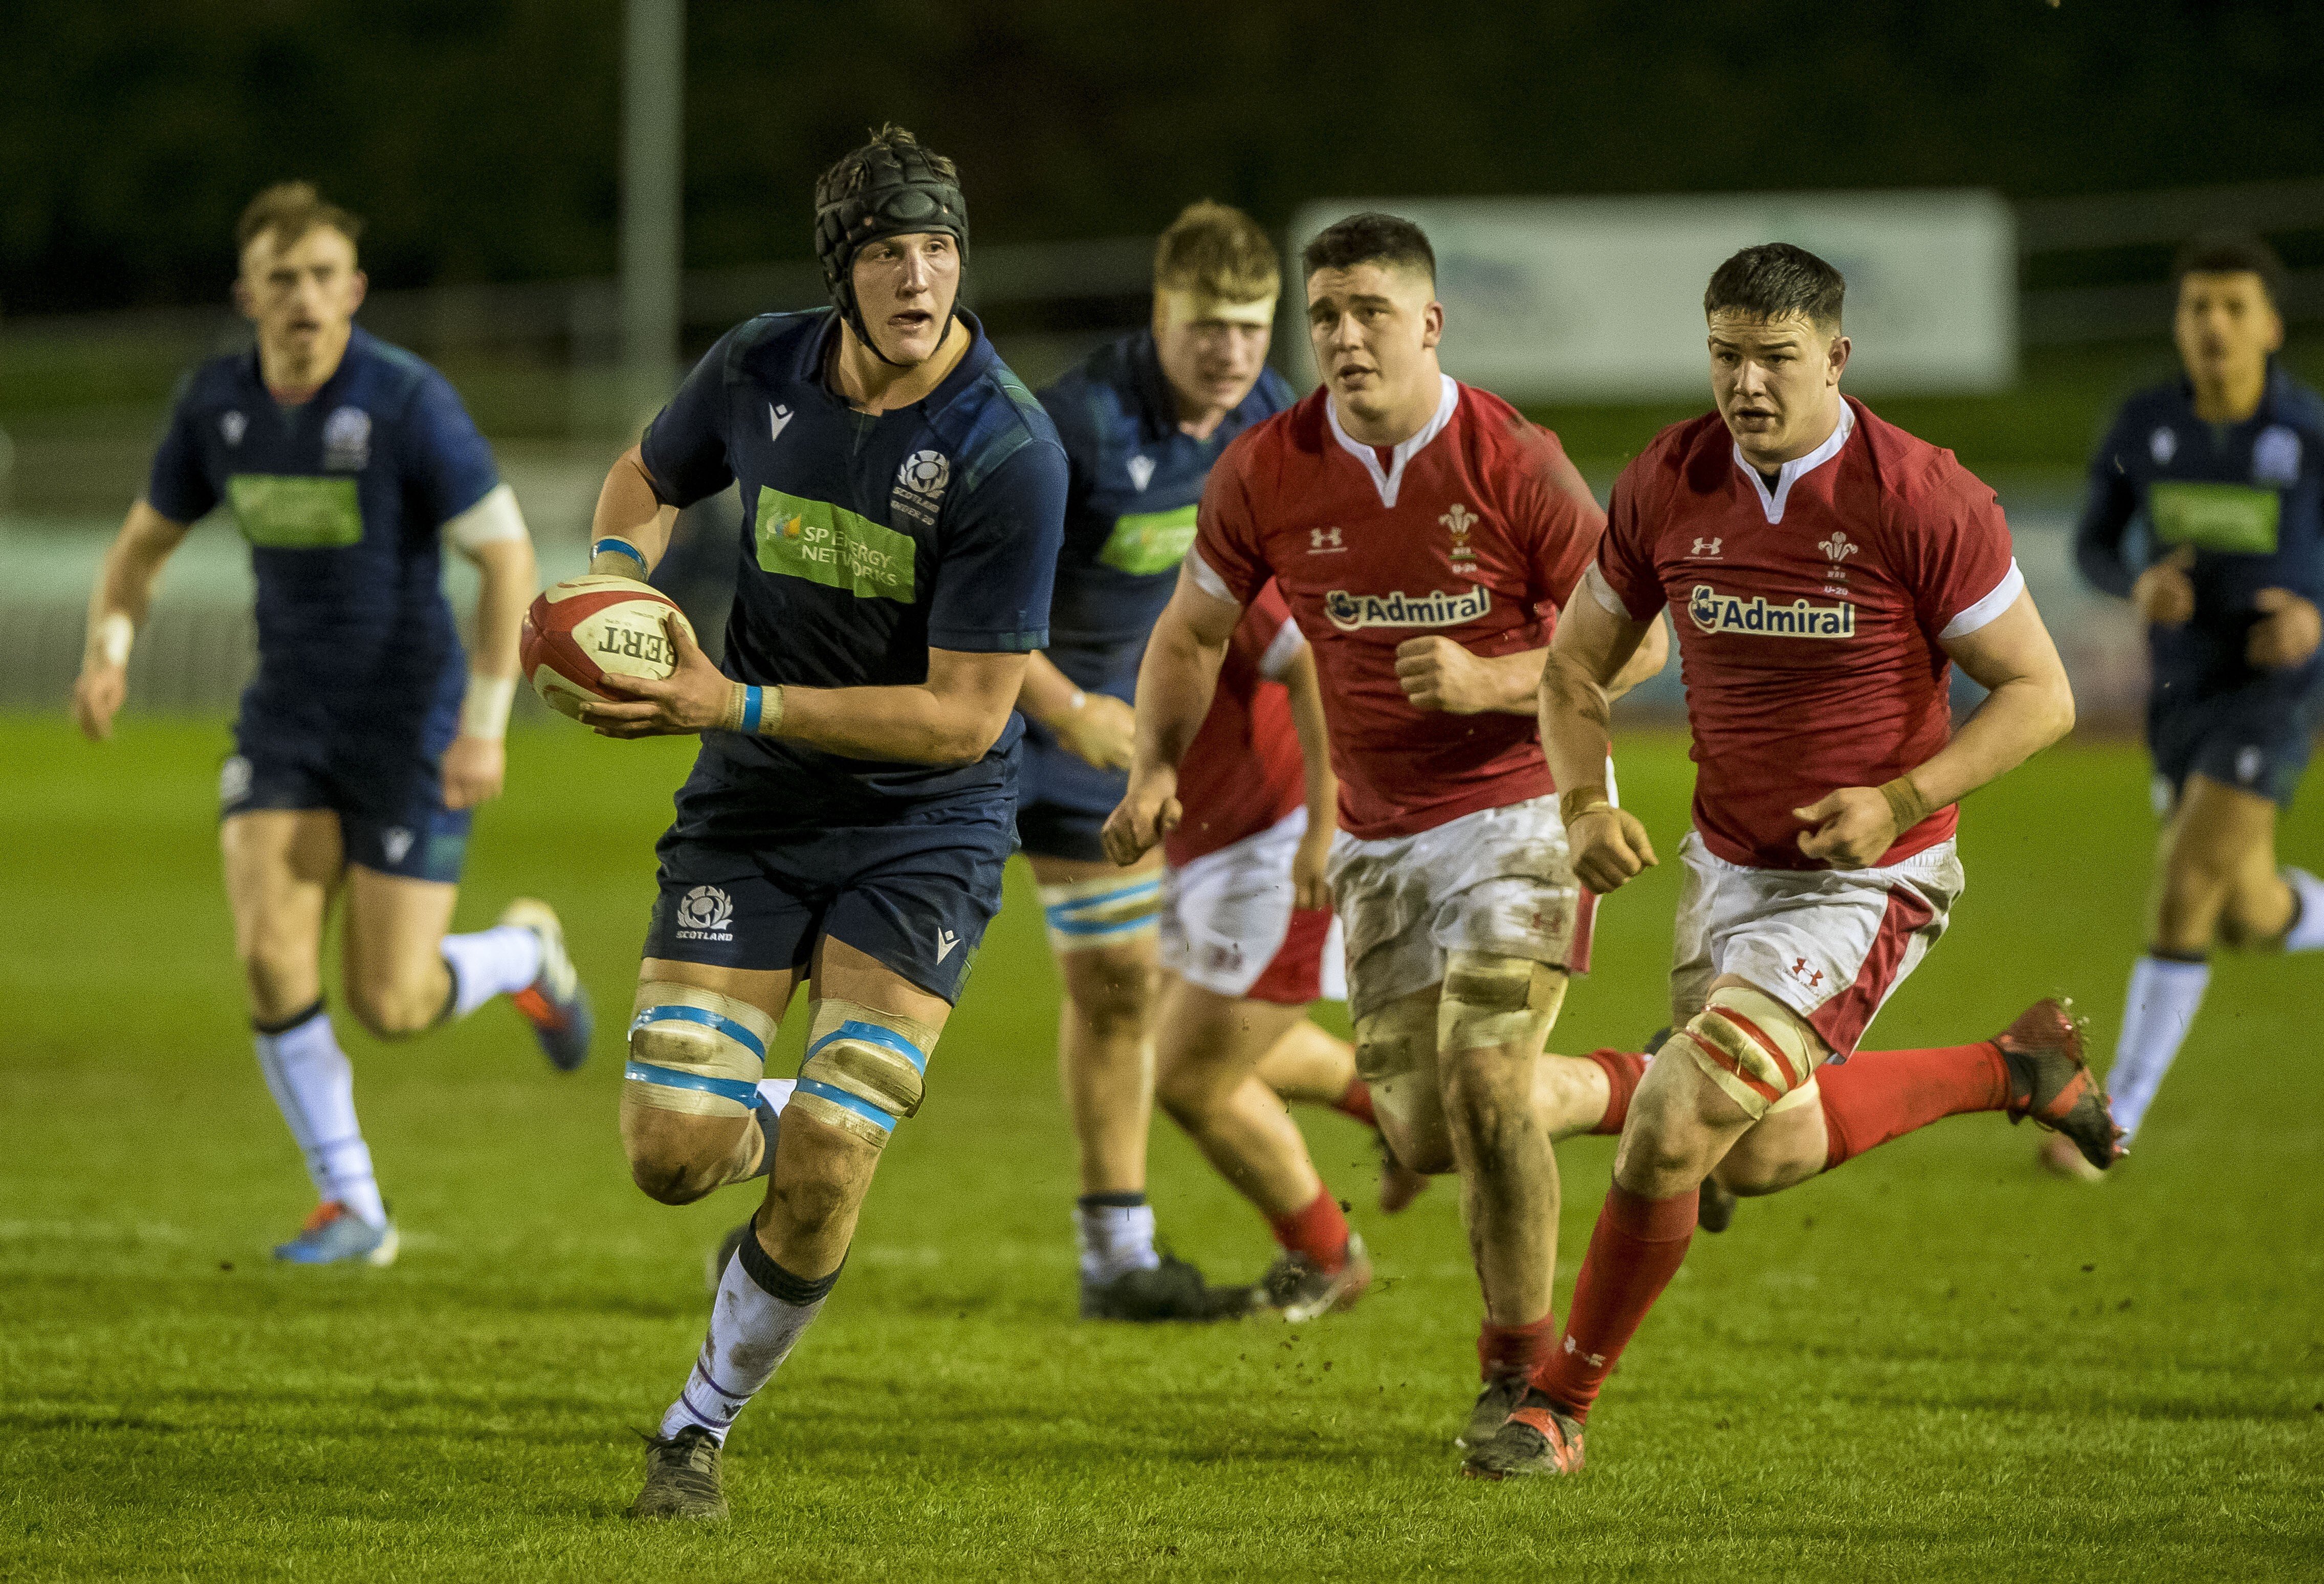 Scotland's Cameron Henderson takes the ball in a record-breaking match against Wales this year. Photo: Craig Watson